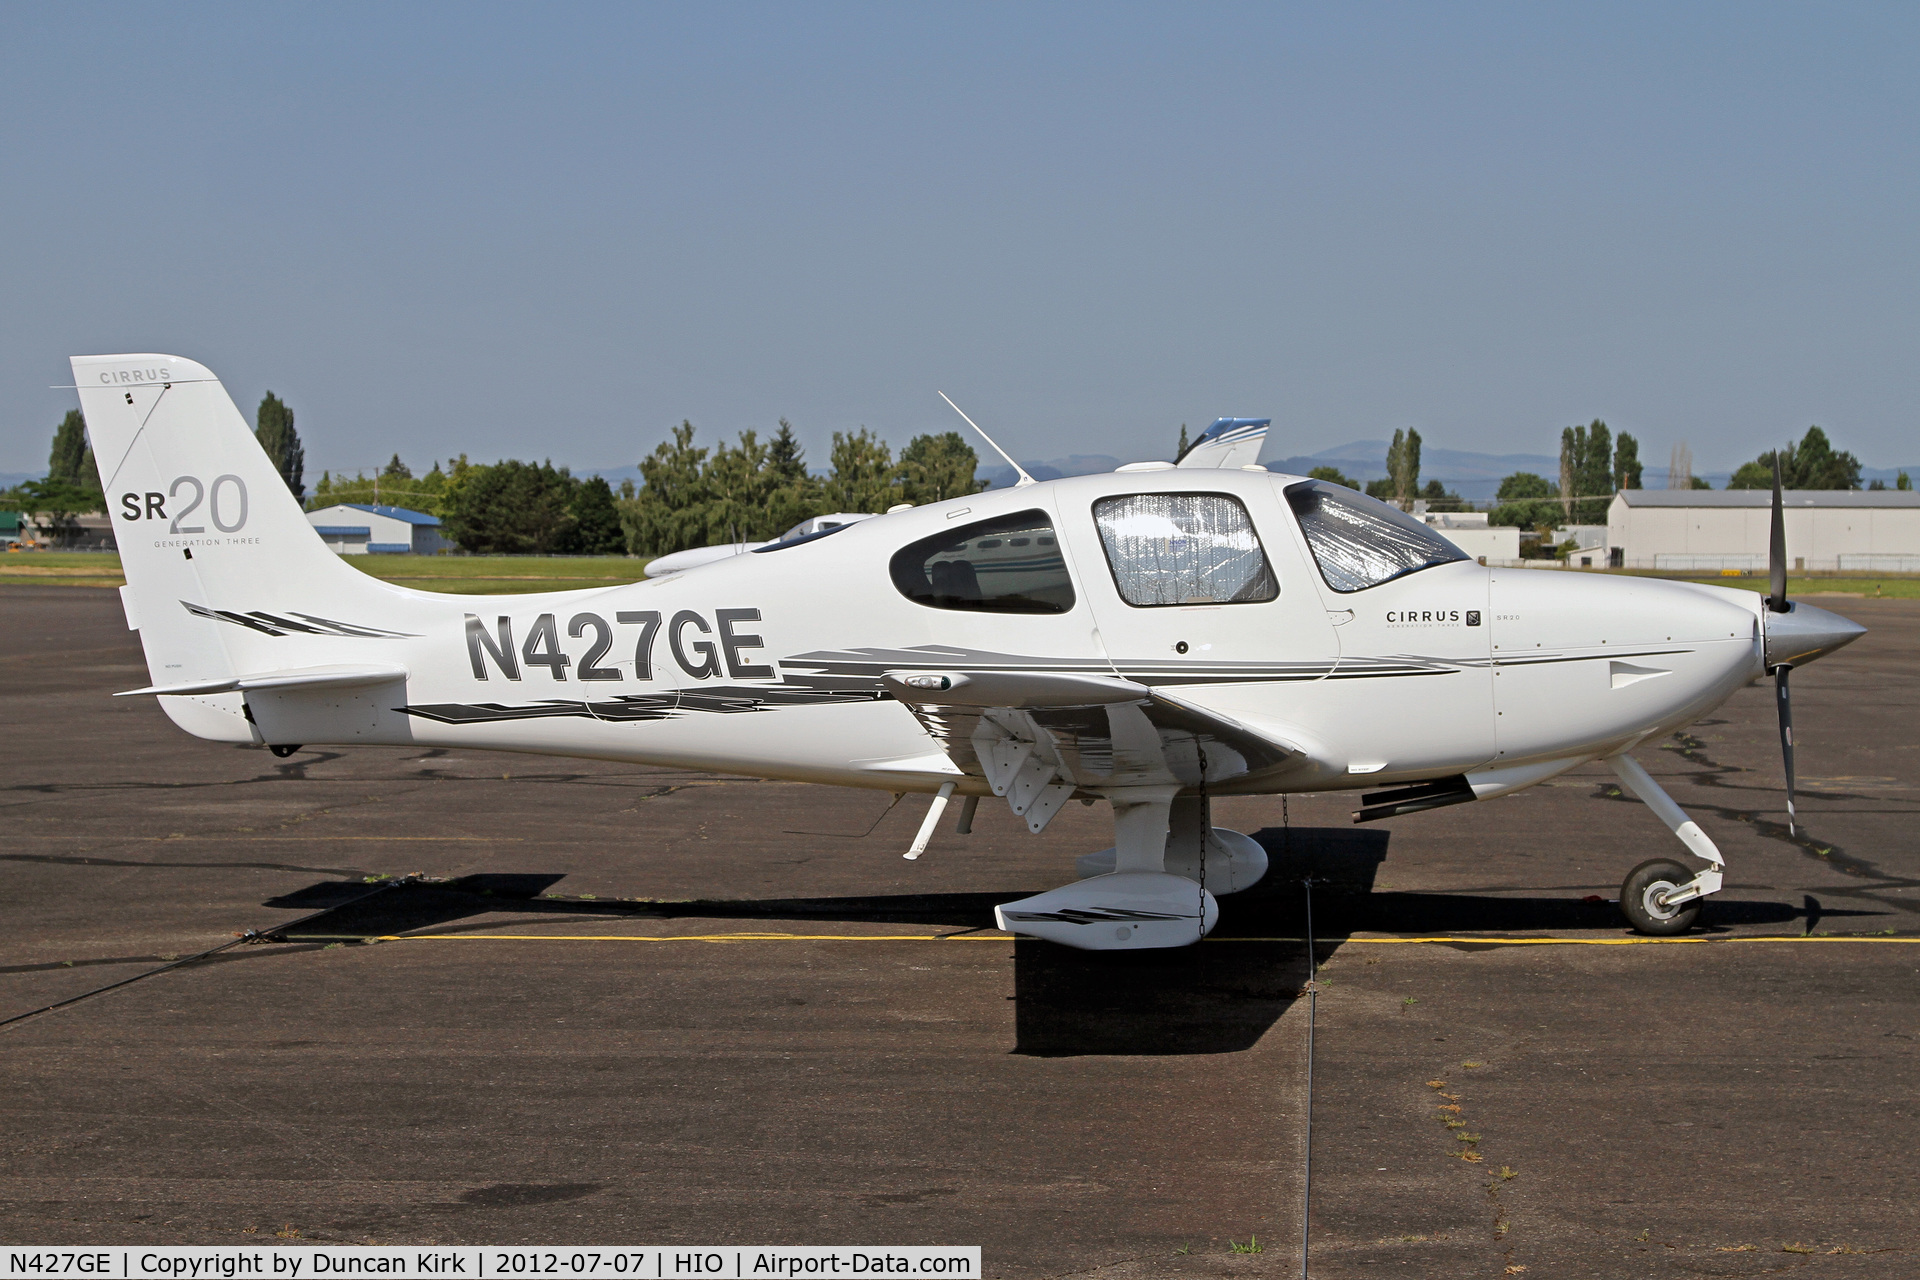 N427GE, 2008 Cirrus SR20 C/N 1984, You just can't beat the lines of a Cirrus.